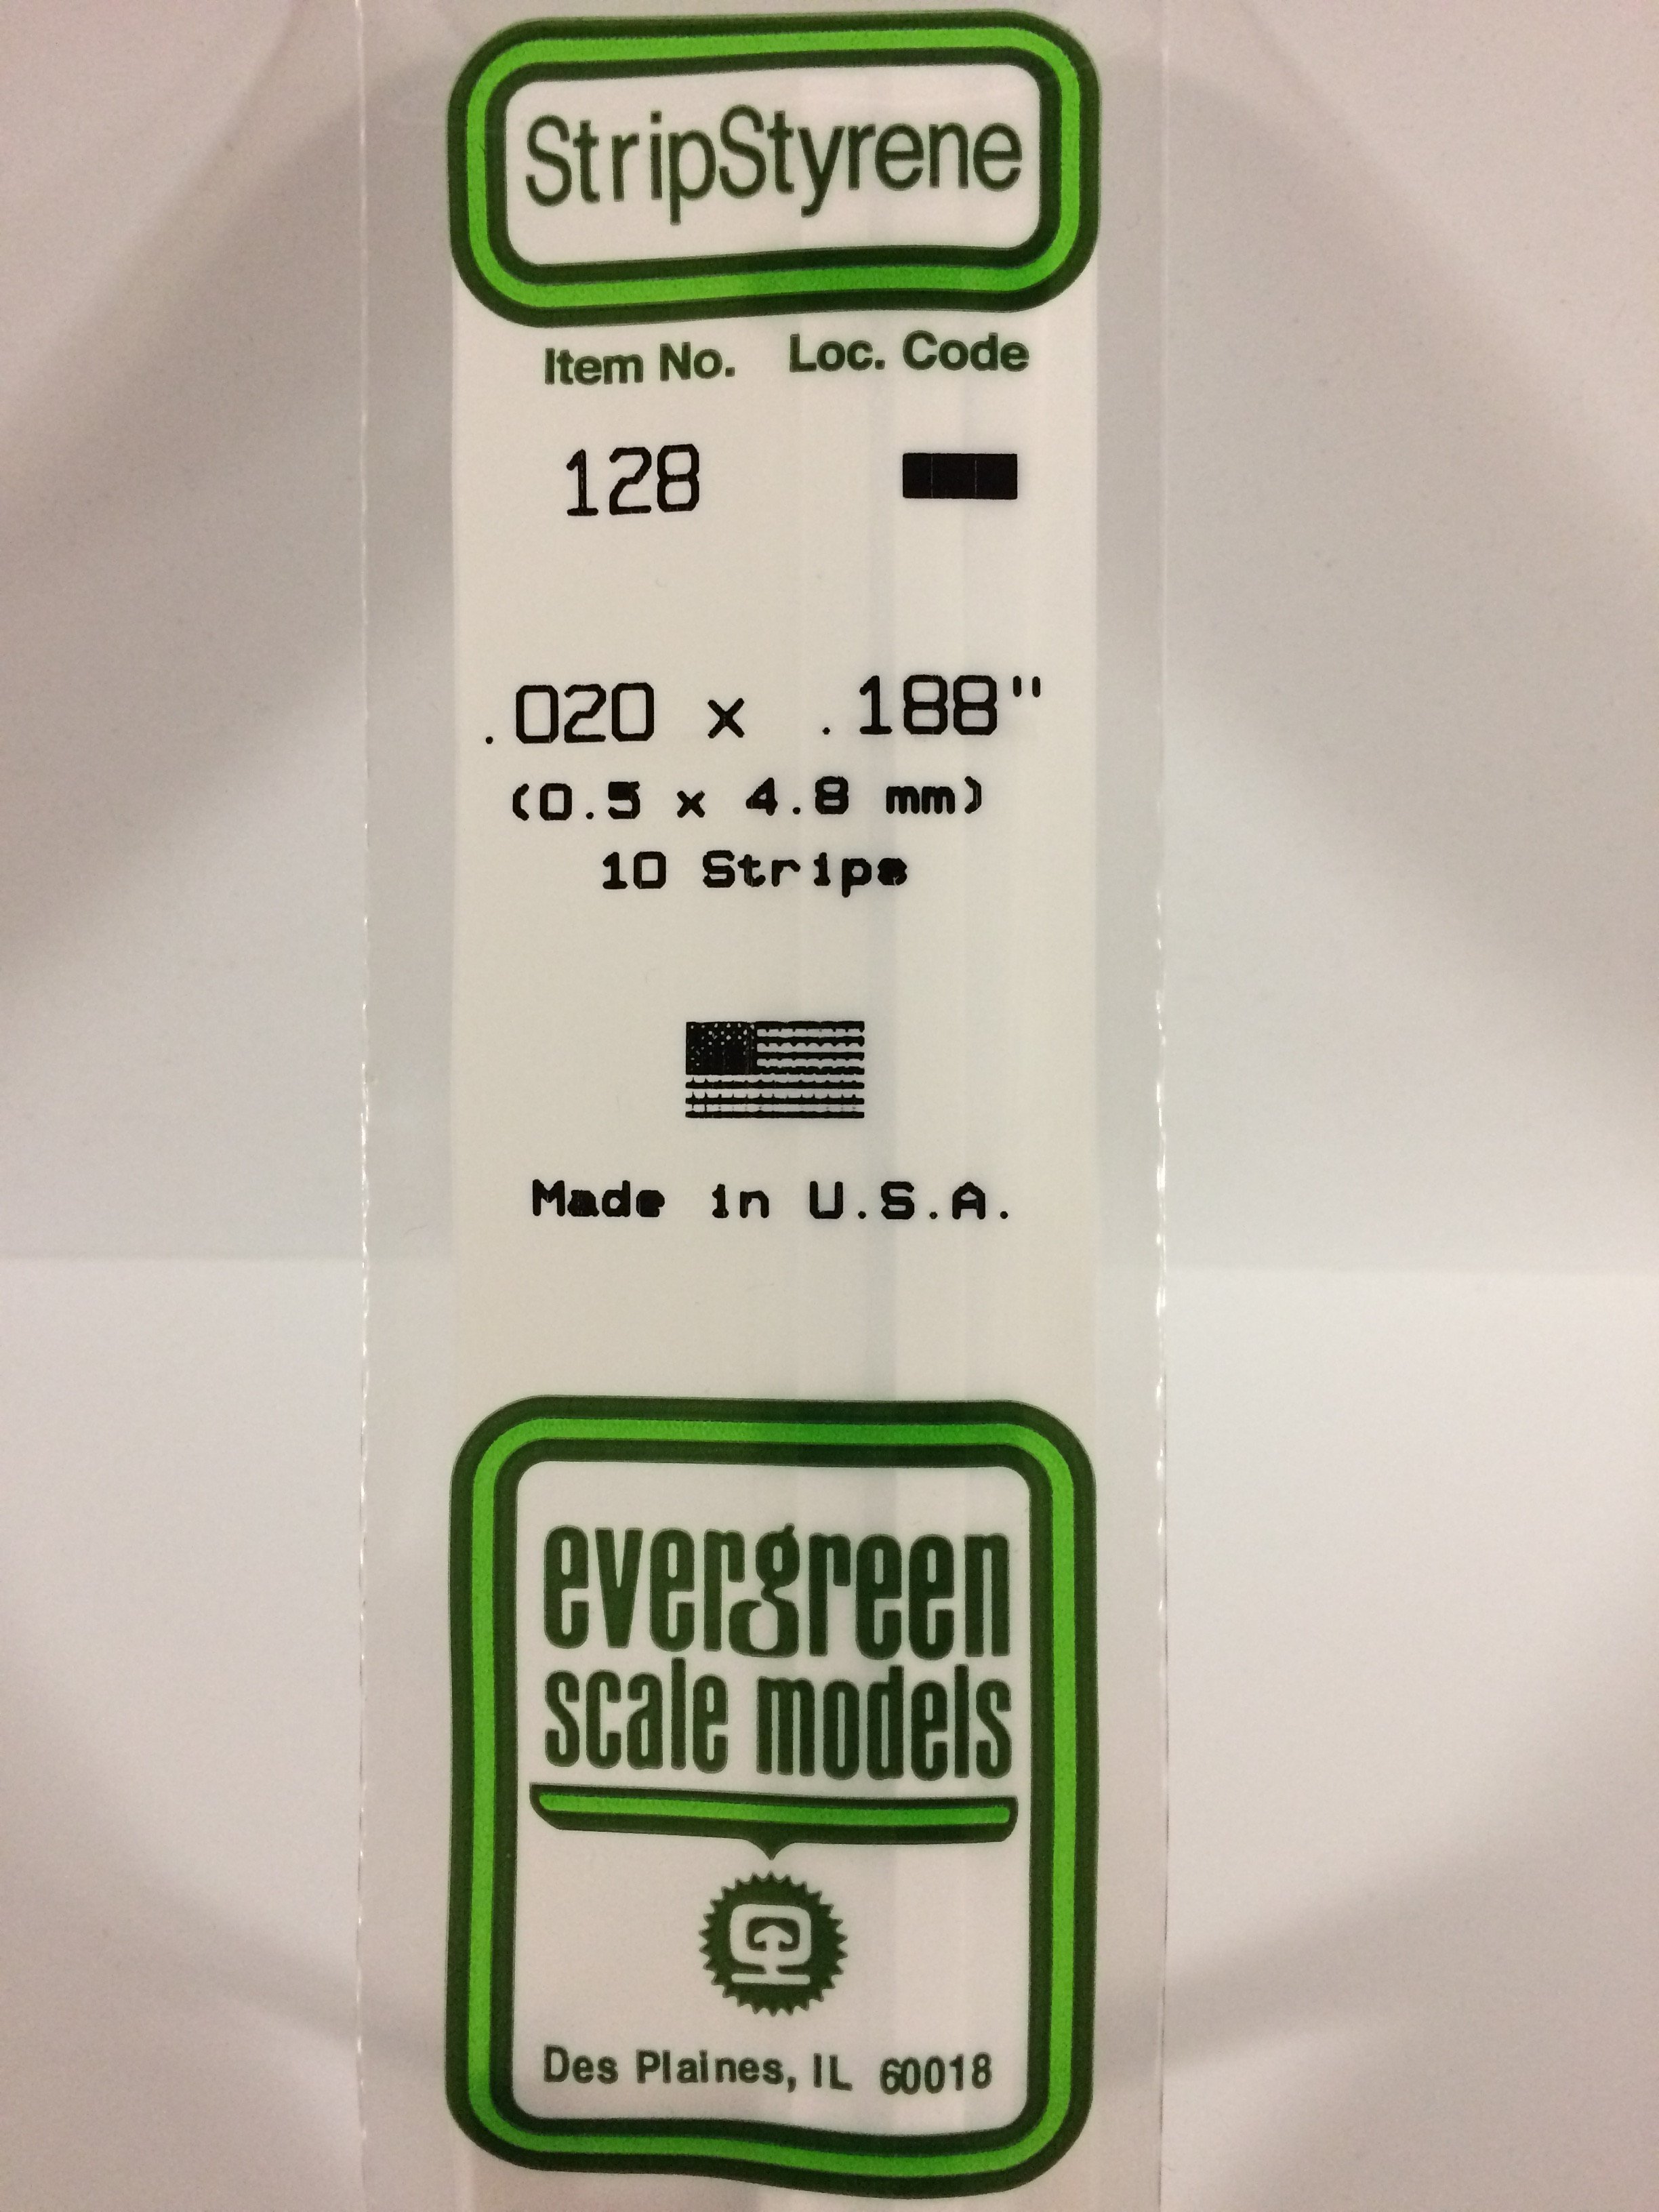 4 Shipping is Free Strip .188 x .188 Evergreen Scale Models